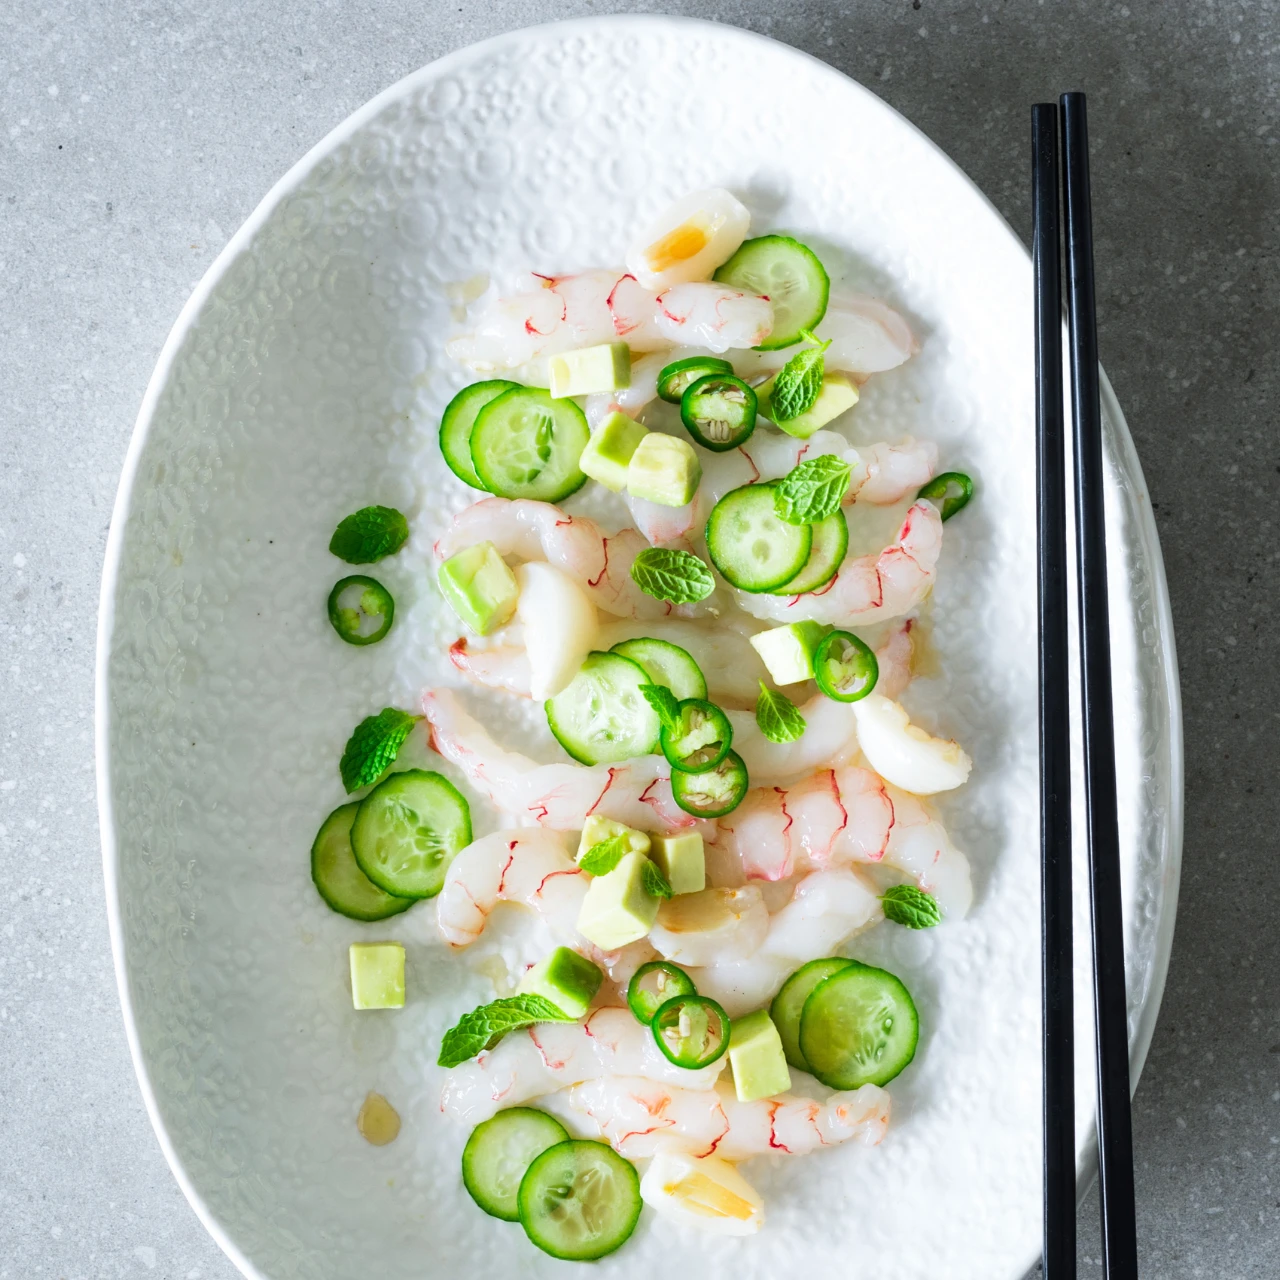 Try our Scampi Sashimi Recipe. It's  light, fresh & something different. Shrimp or prawns are an easy substitute for scampi.